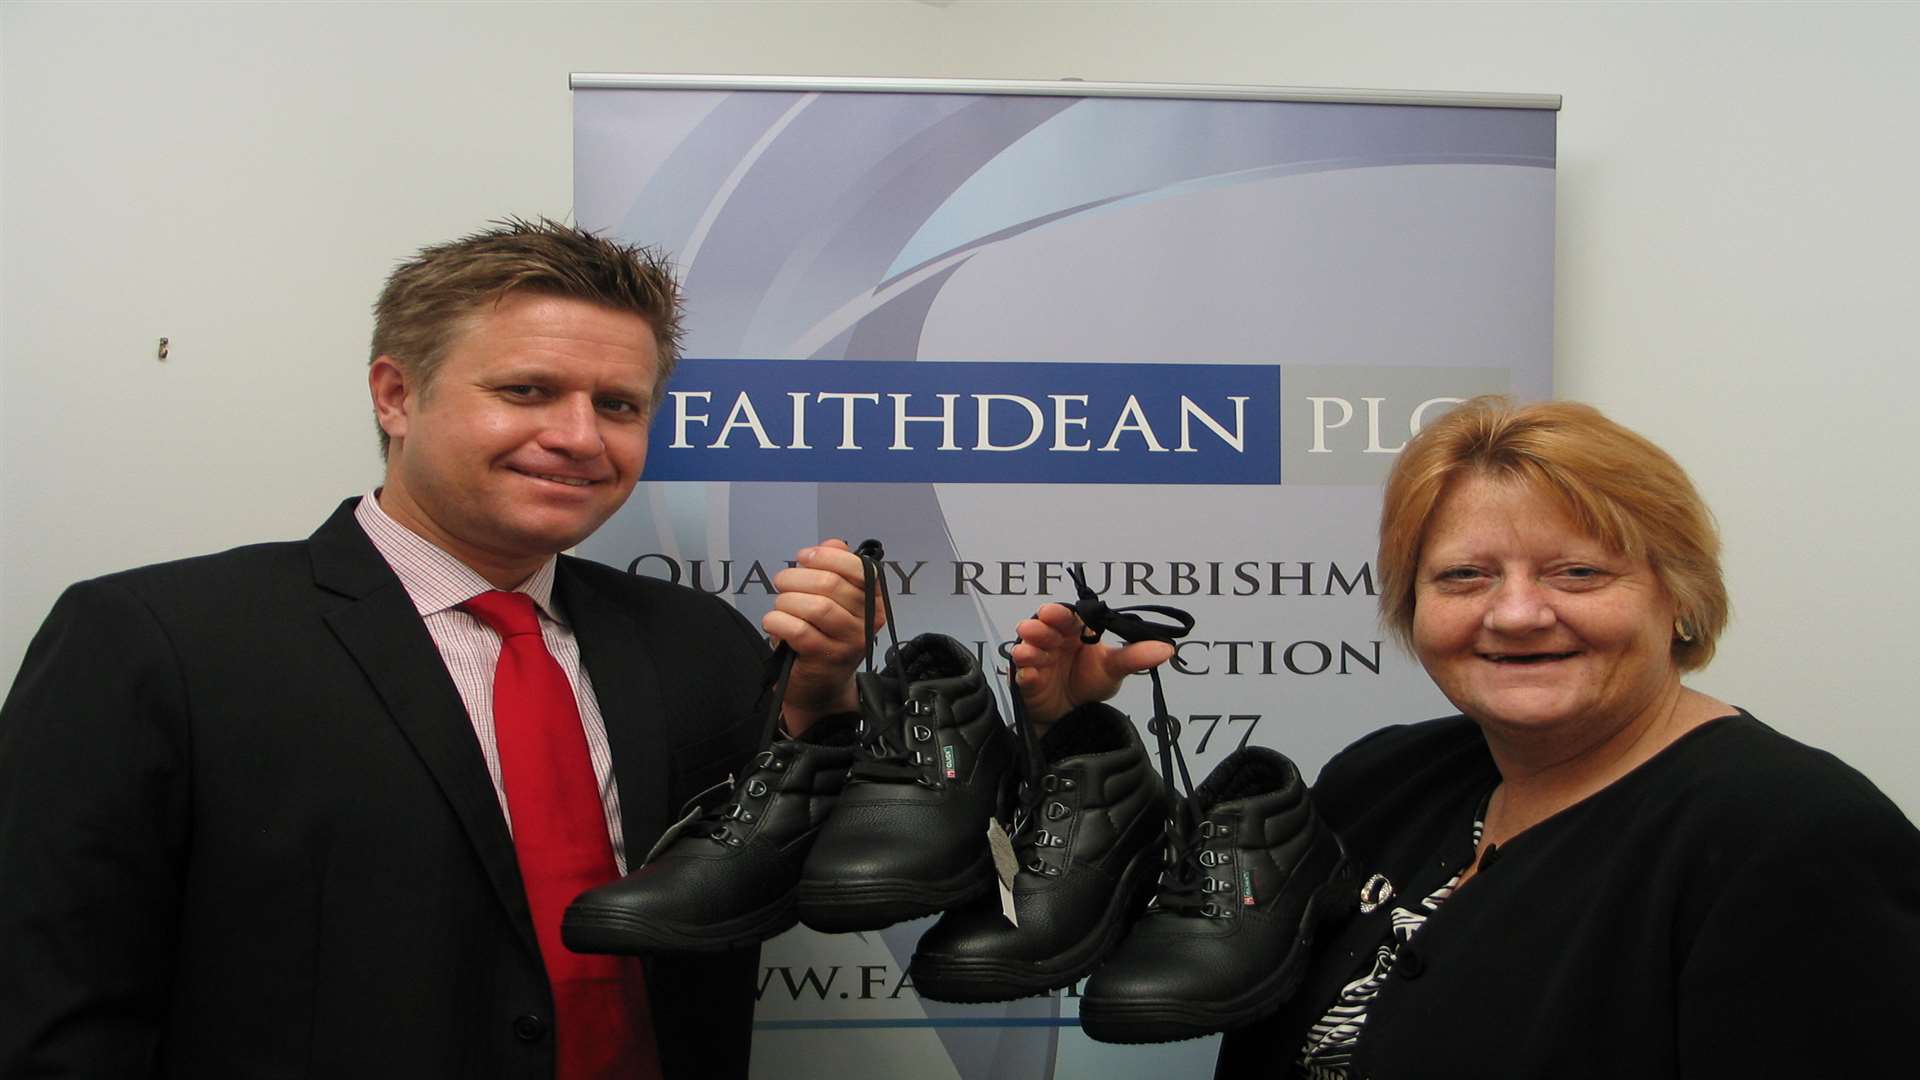 Damien South, director of Faithdean with cllr Marion Ring